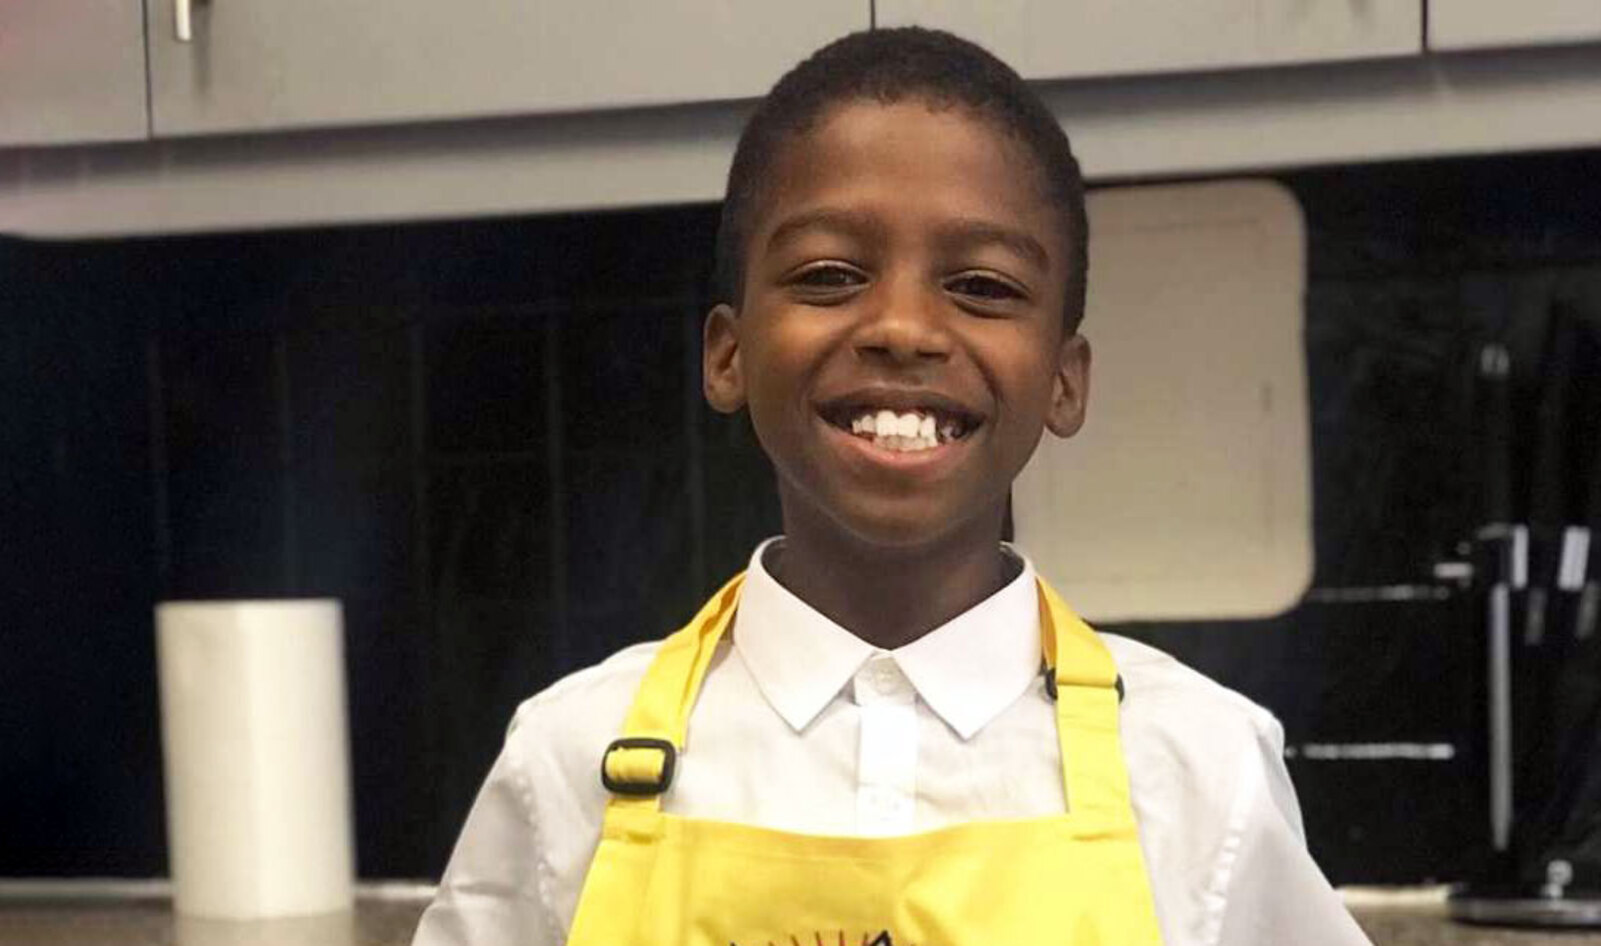 11-Year-Old Vegan Chef Punched By Classmate, Makes Moving Statement About Bullying